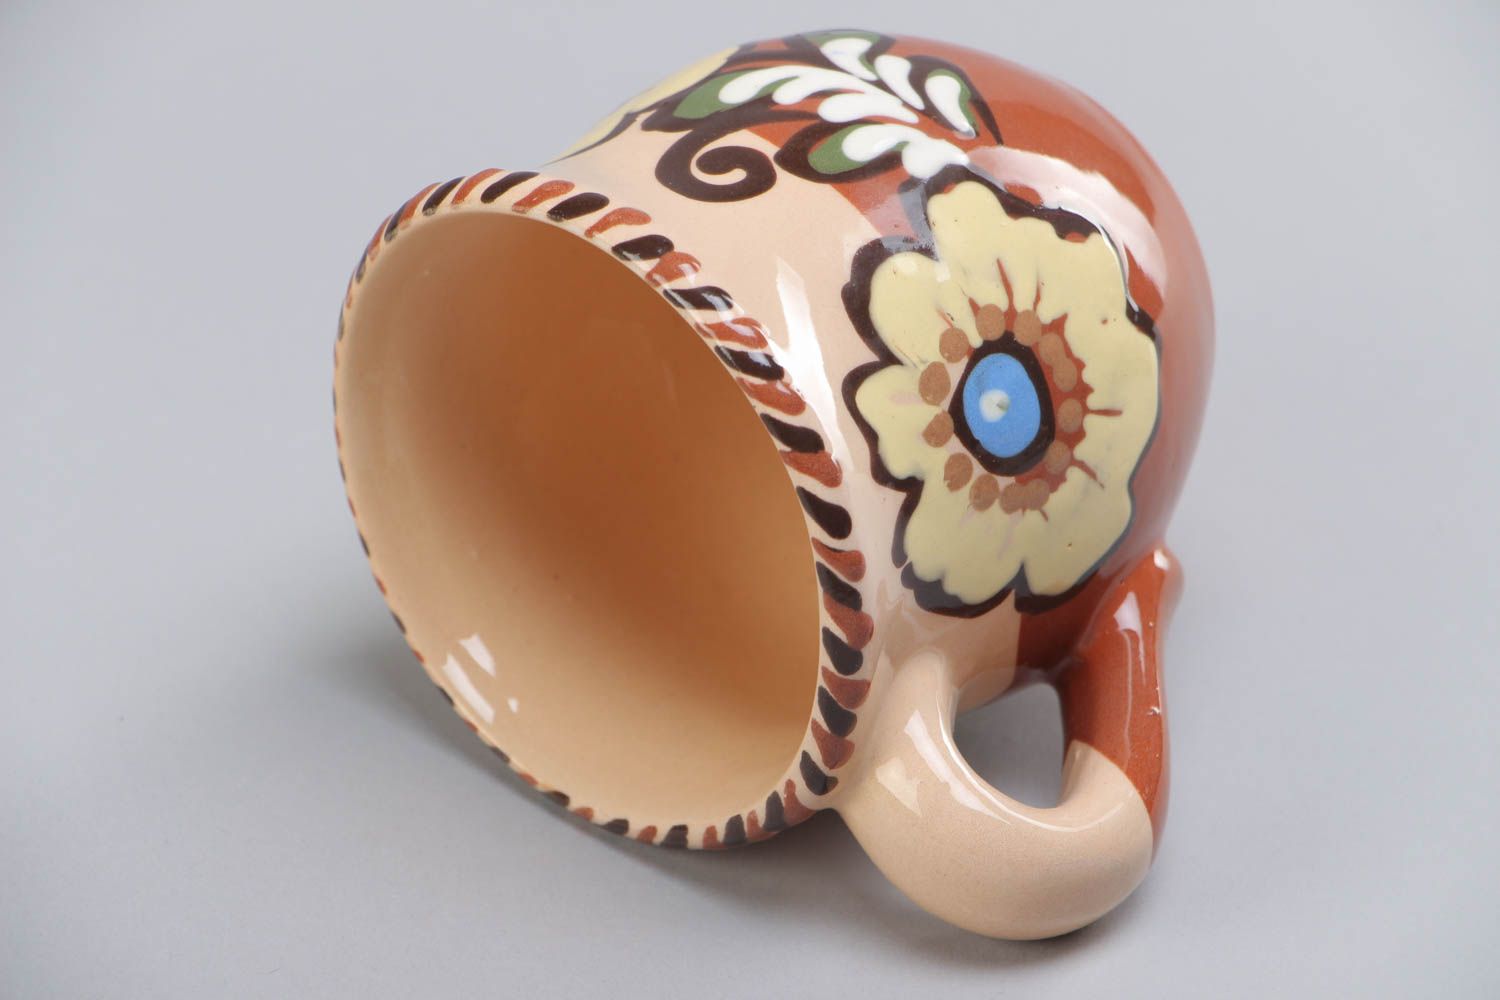 8 oz ceramic glazed clay drinking handmade cup with handle in brown and beige color with floral pattern photo 4